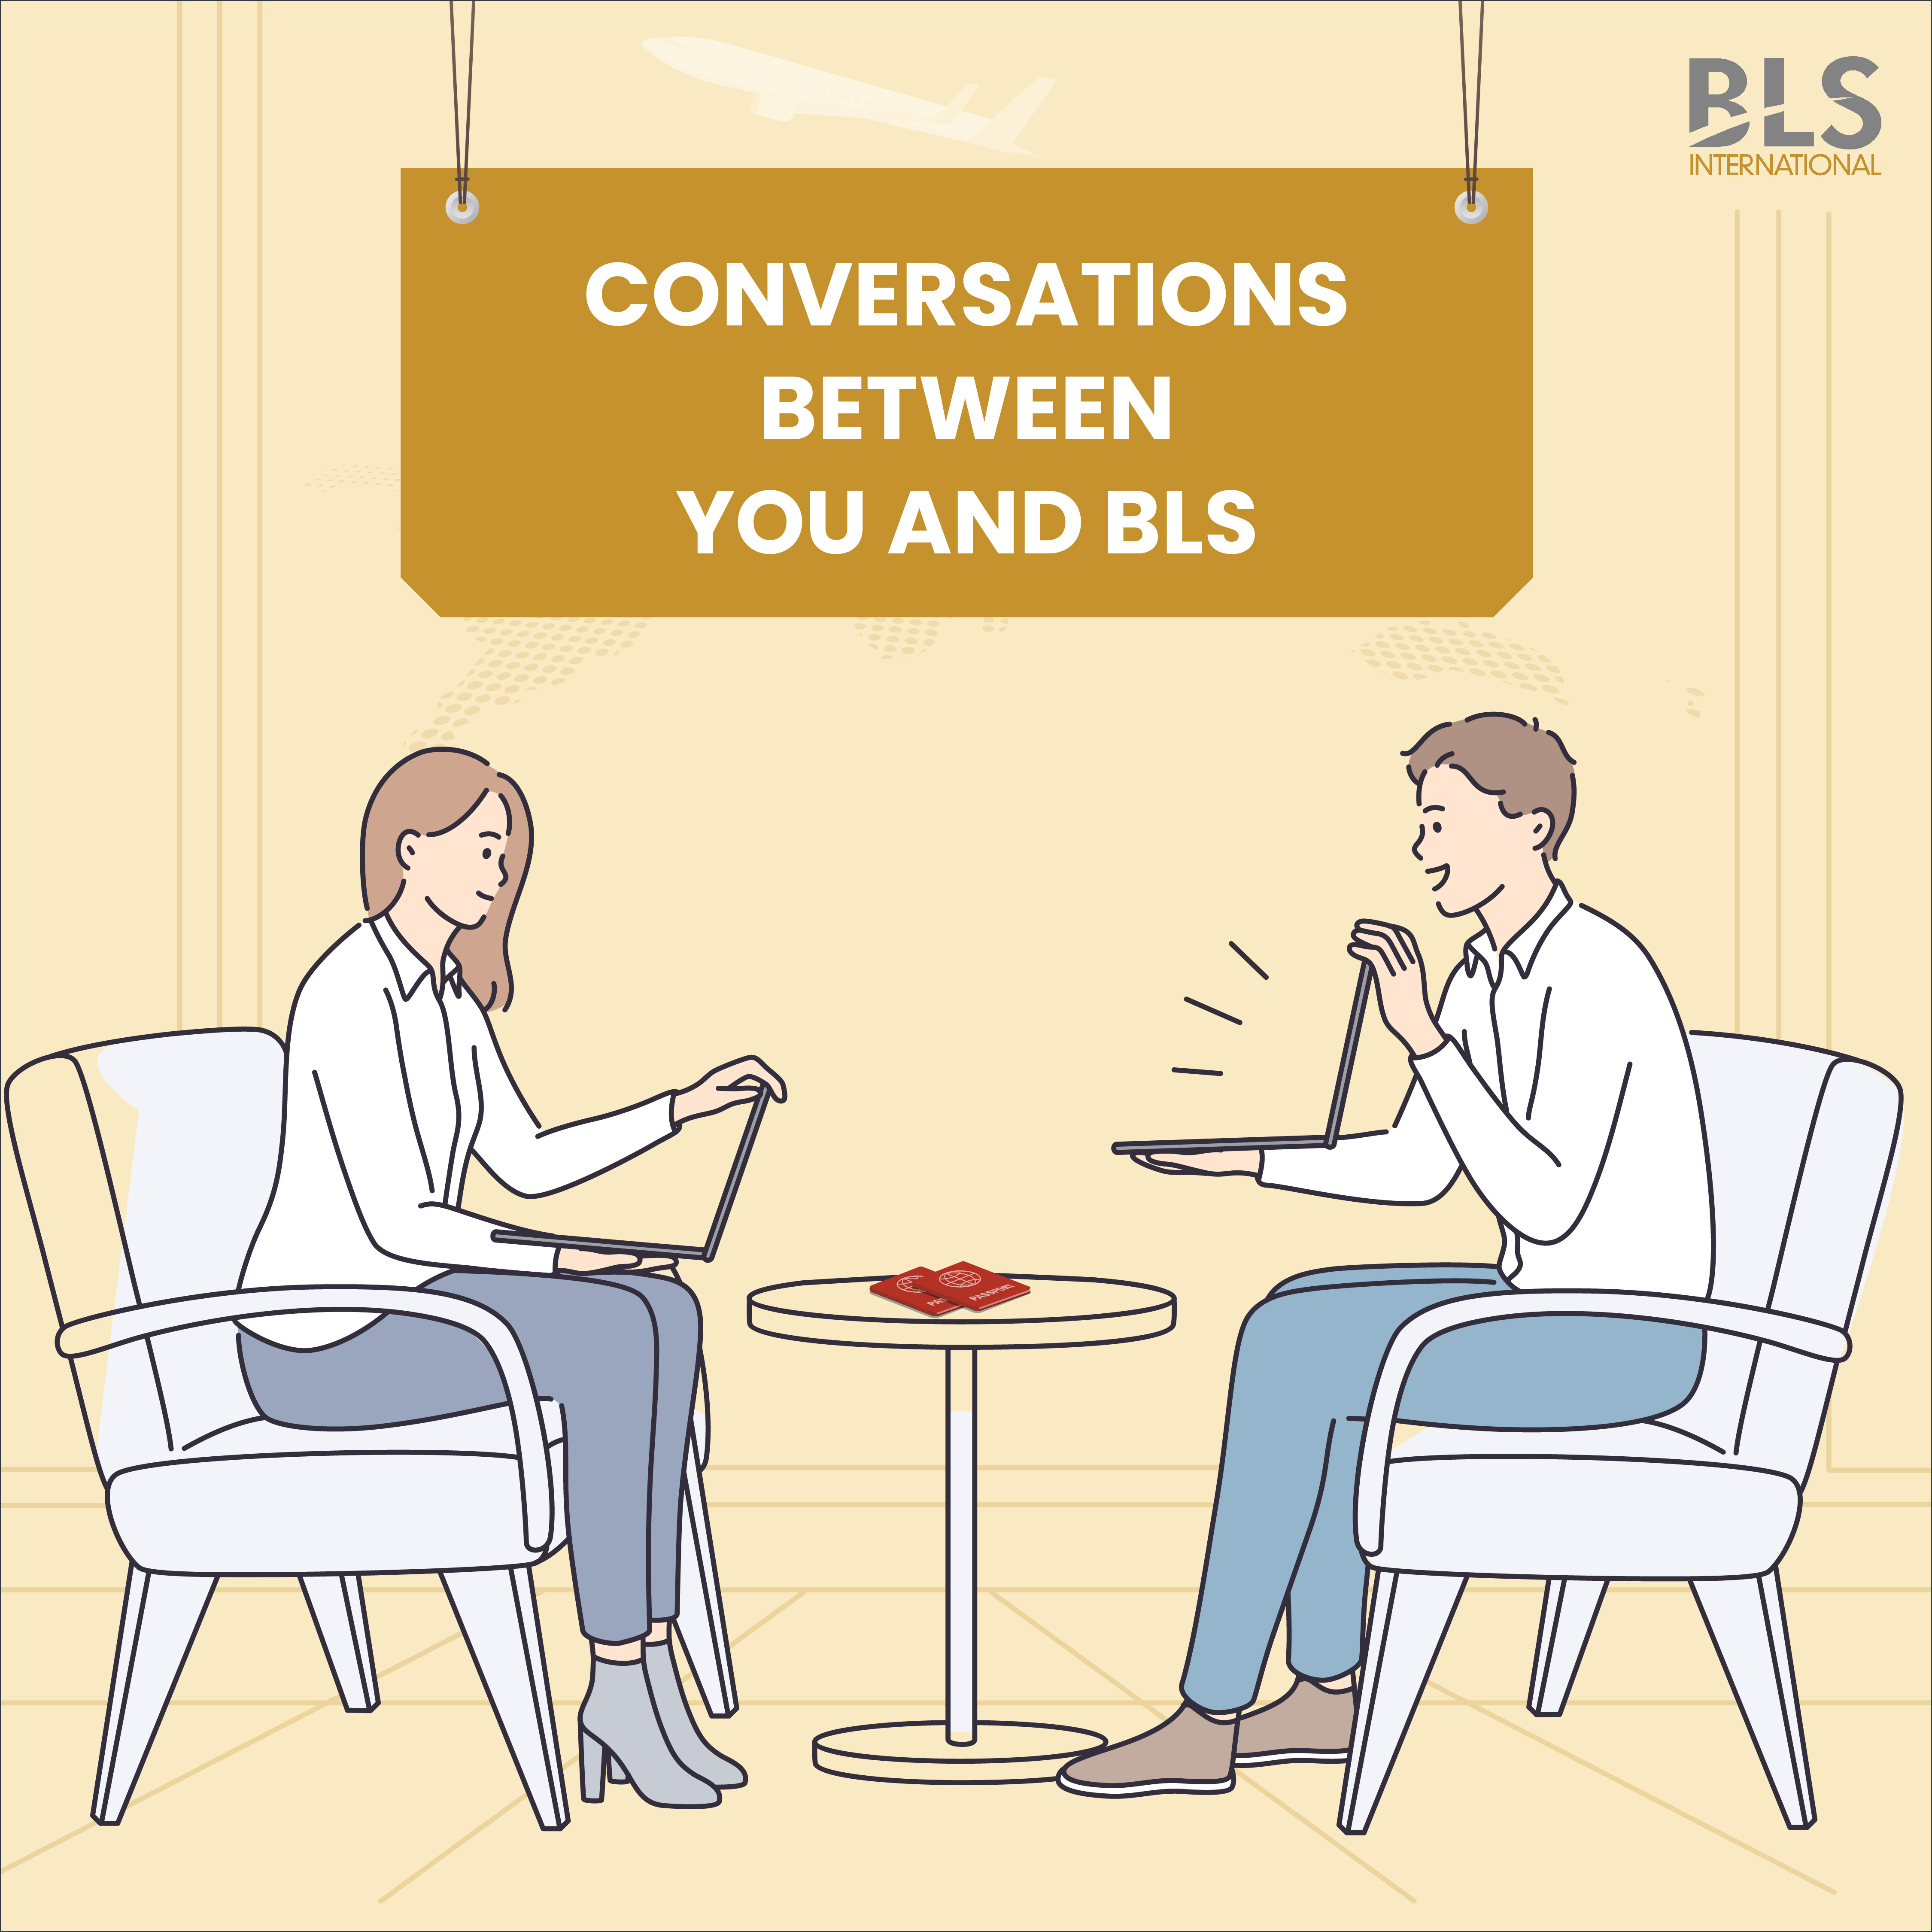 CONVERSATIONS BETWEEN YOU AND BLS